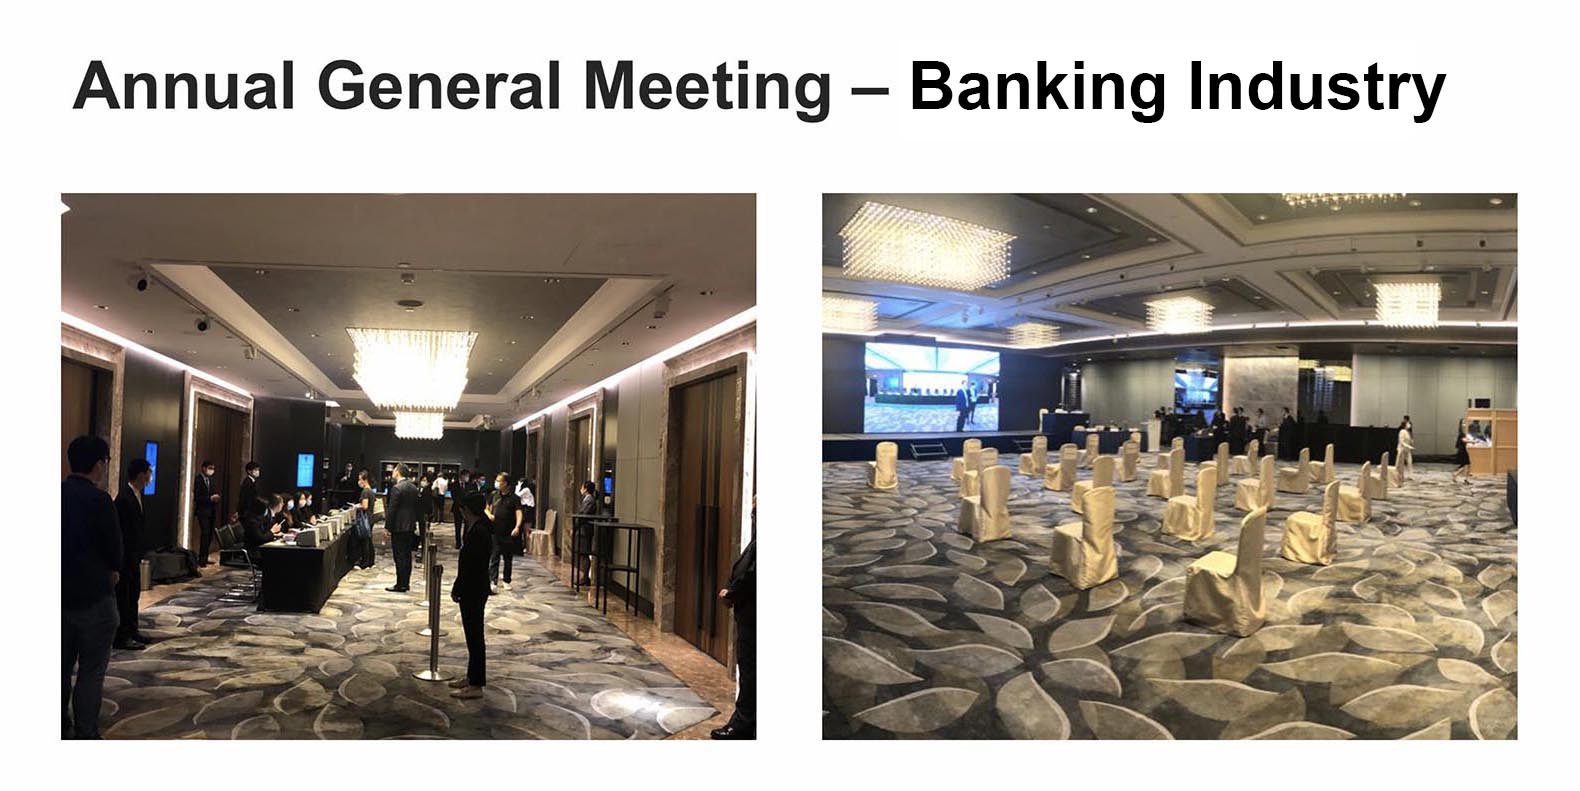 Aunnal General Meeting - Citic Holdings